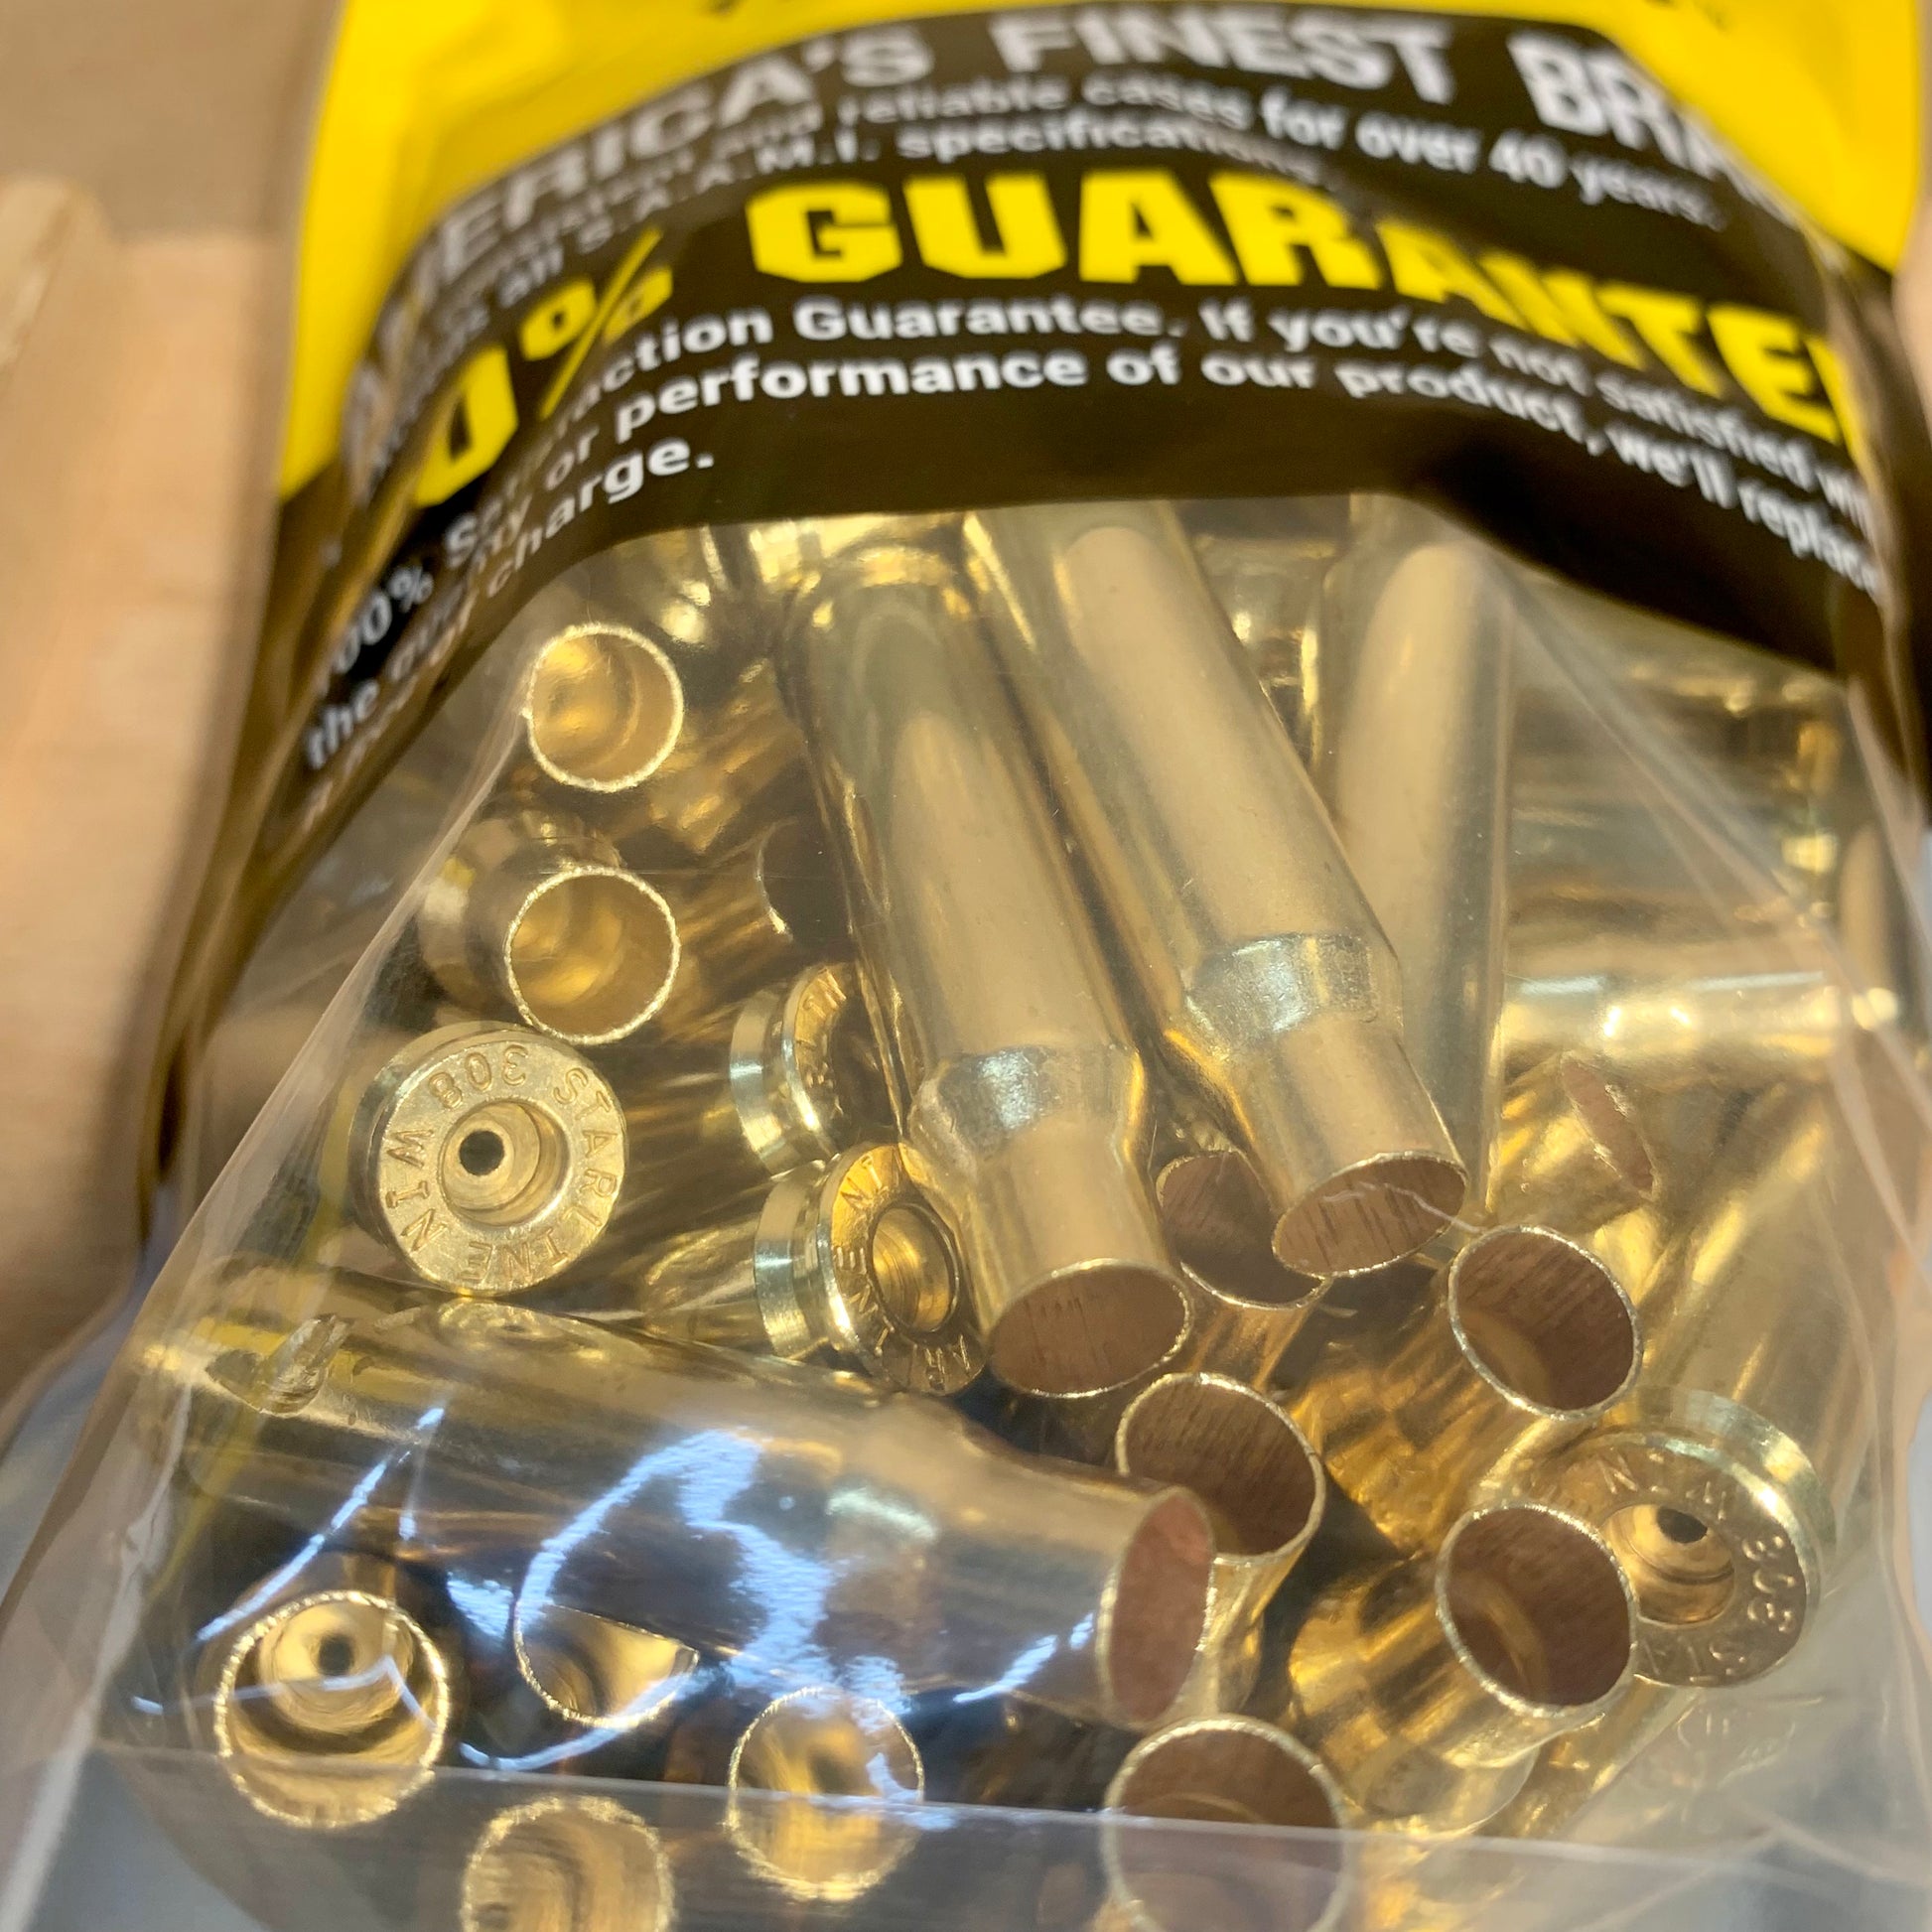 100 Count Bag New Starline .308 Winchester Brass Casings - LP